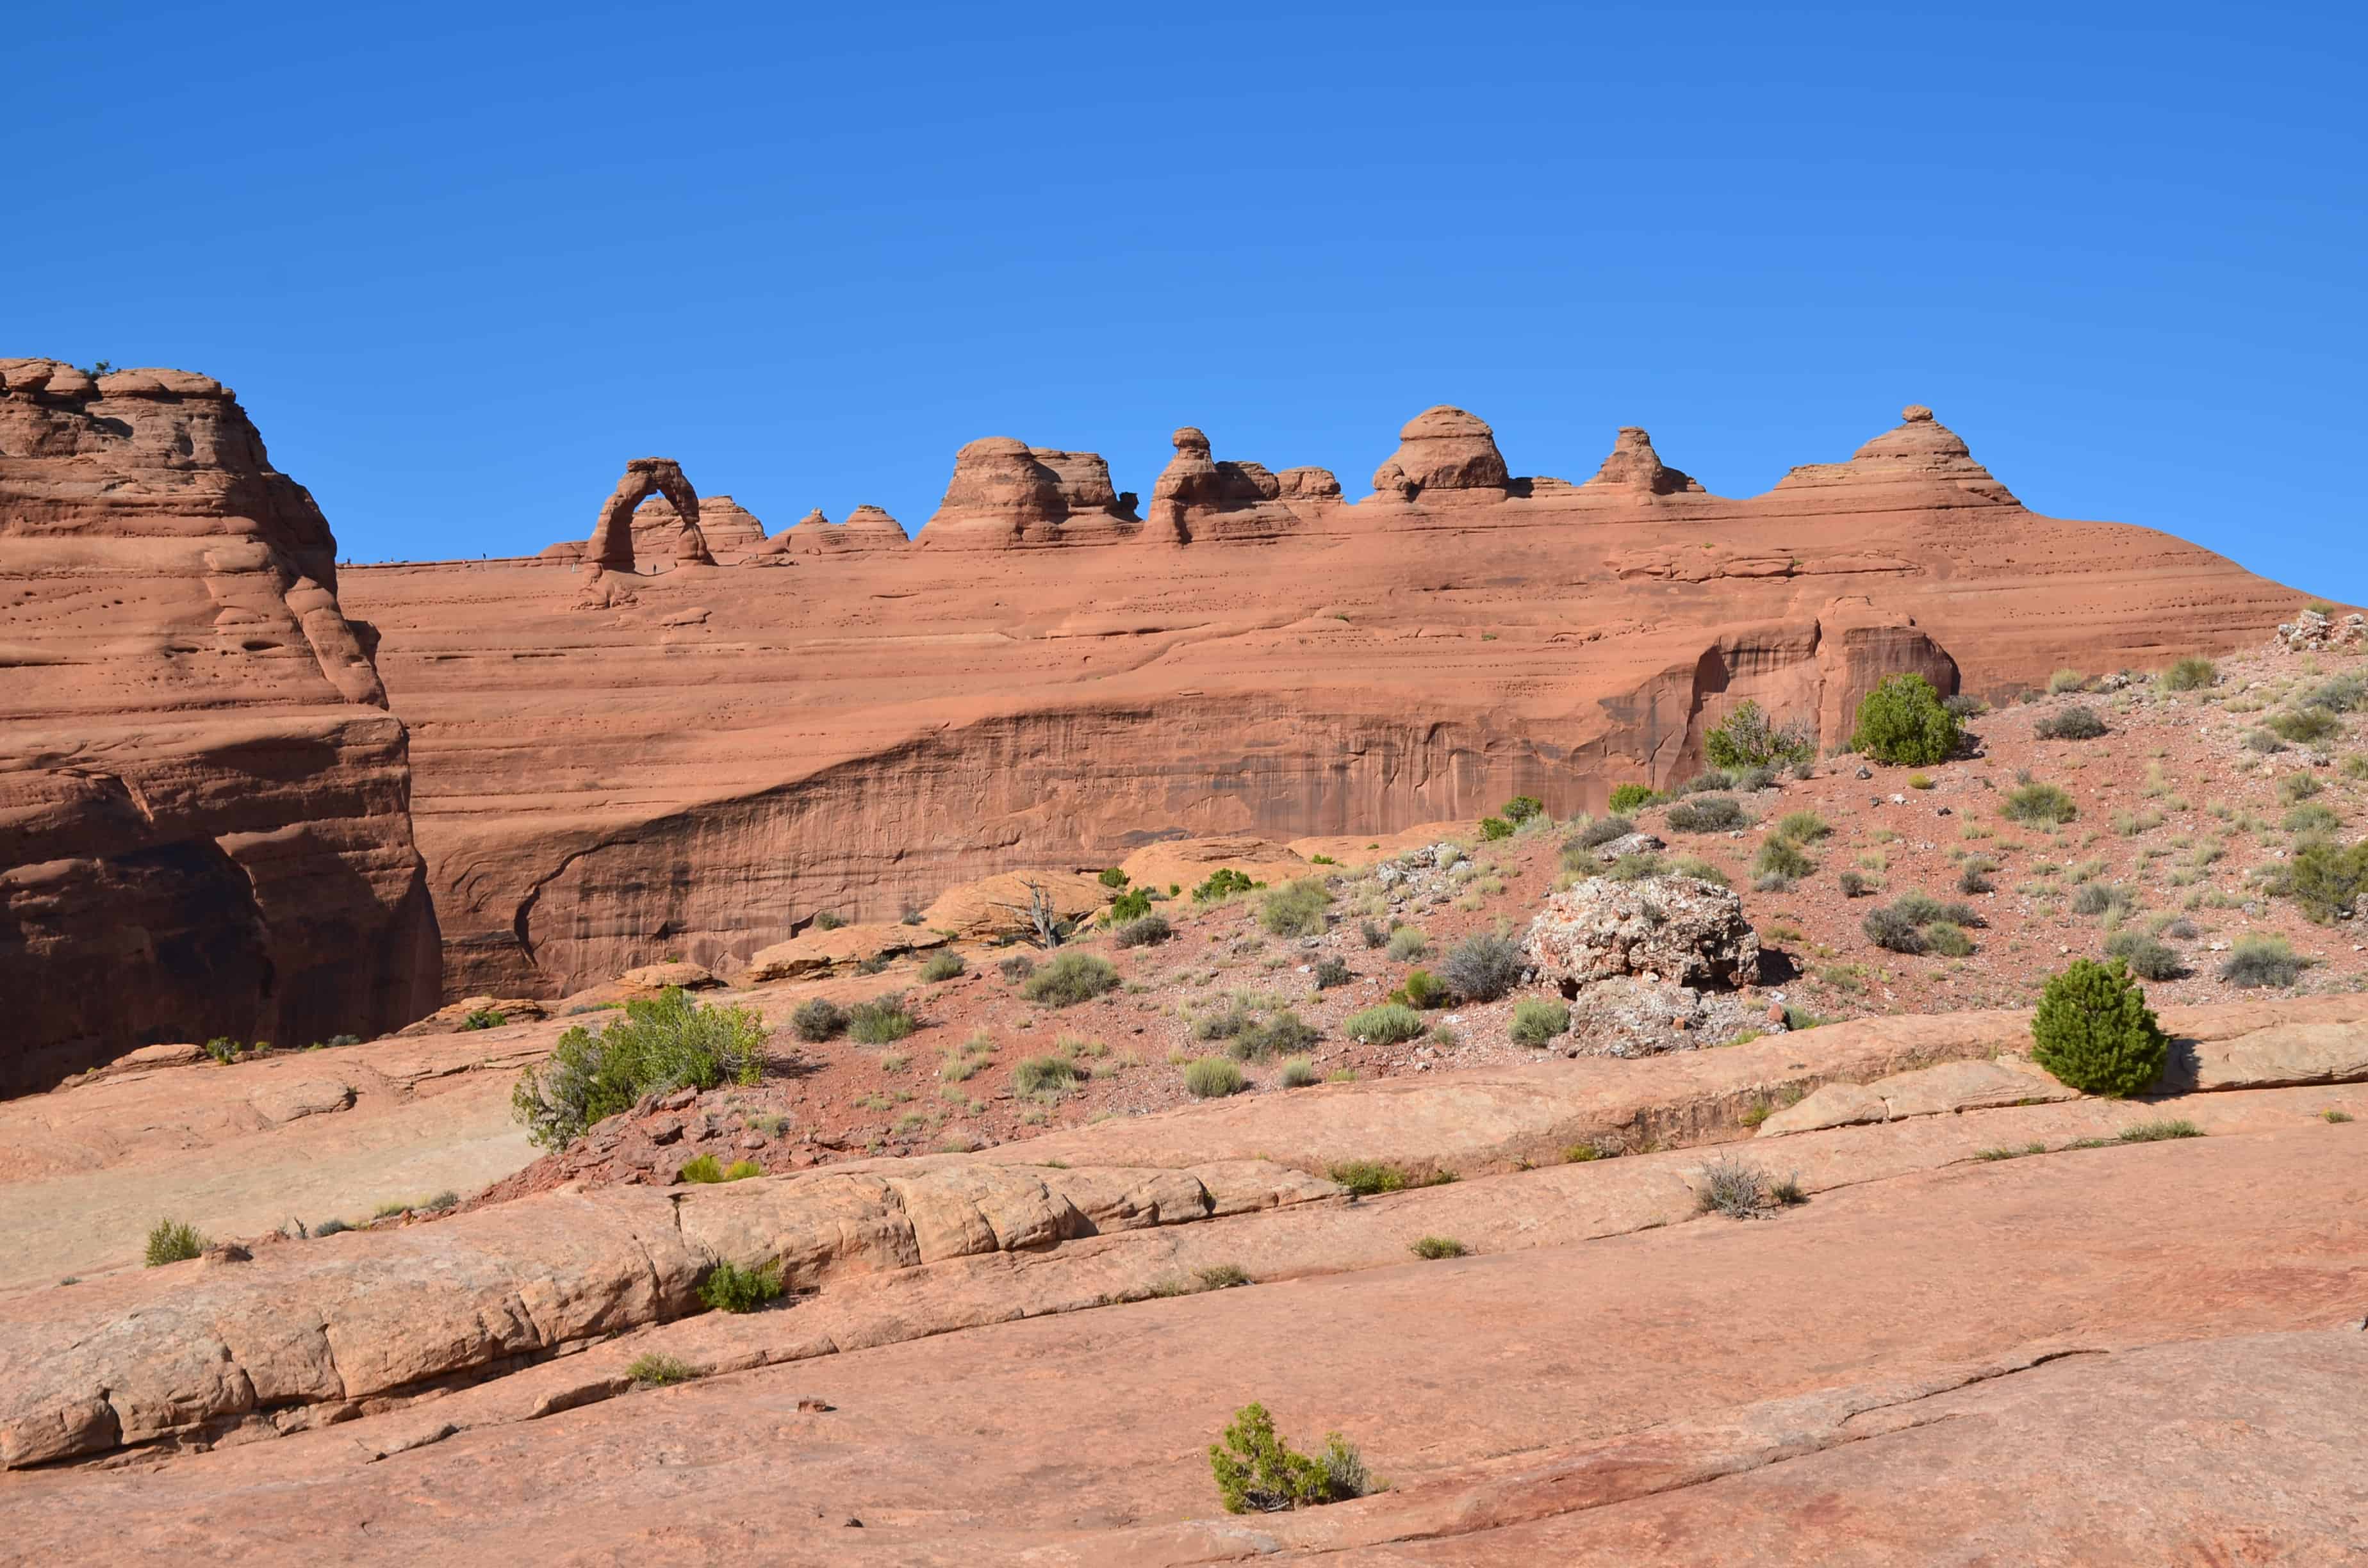 Upper Delicate Arch Viewpoint at Arches National Park in Utah